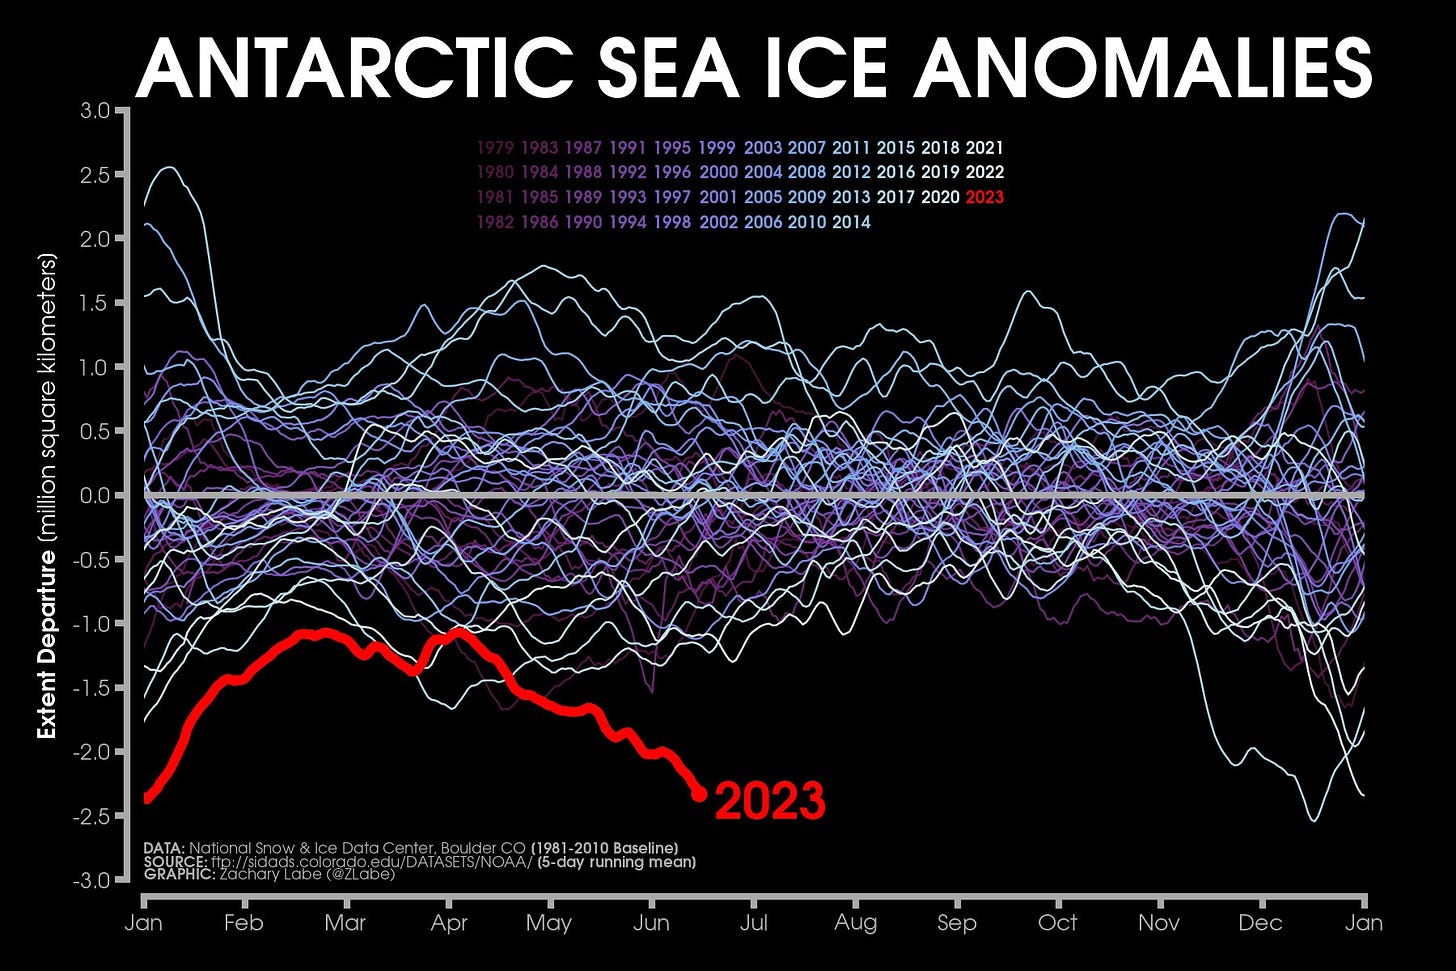 Line graph time series of 2023's daily Antarctic sea ice extent anomalies in red shading compared to each year from 1979 to 2022 using shades of purple to white for each line. Anomalies are computed relative to a 1981-2010 baseline. 2023 is a negative outlier for this time of year. There is substantial interannual and daily variability. There are no clear long-term trends.